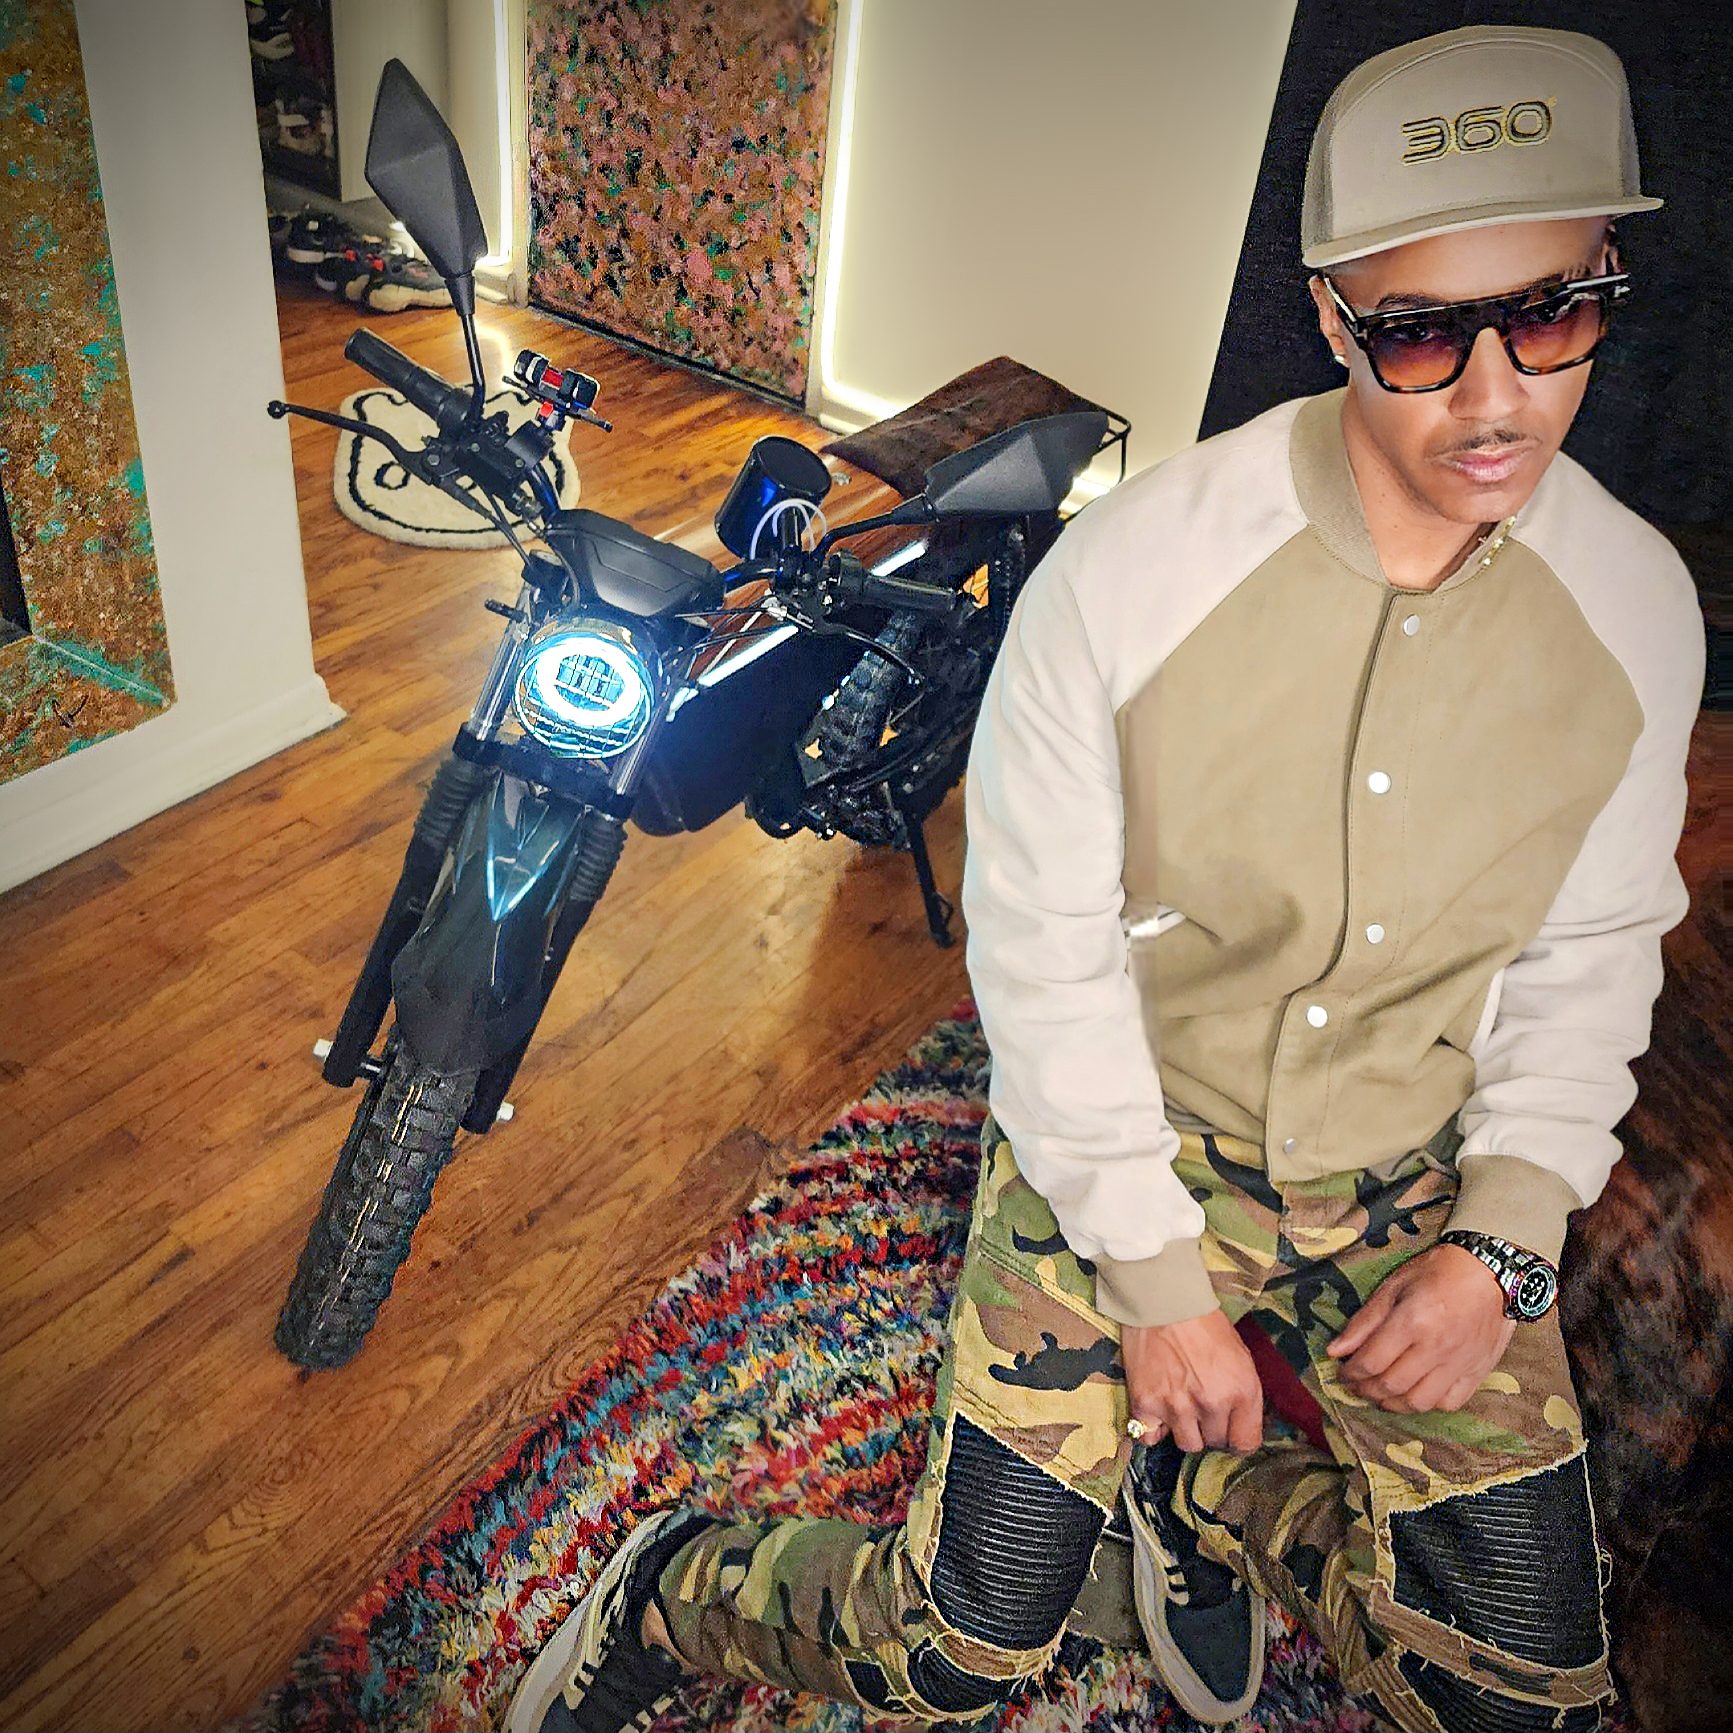 Vaughn Lowery pens e-bike review for ONYX Motorbikes RCR for 360 MAGAZINE, wearing Tom Ford eyewear, Allsaints jacket, and Reebok sneakers.